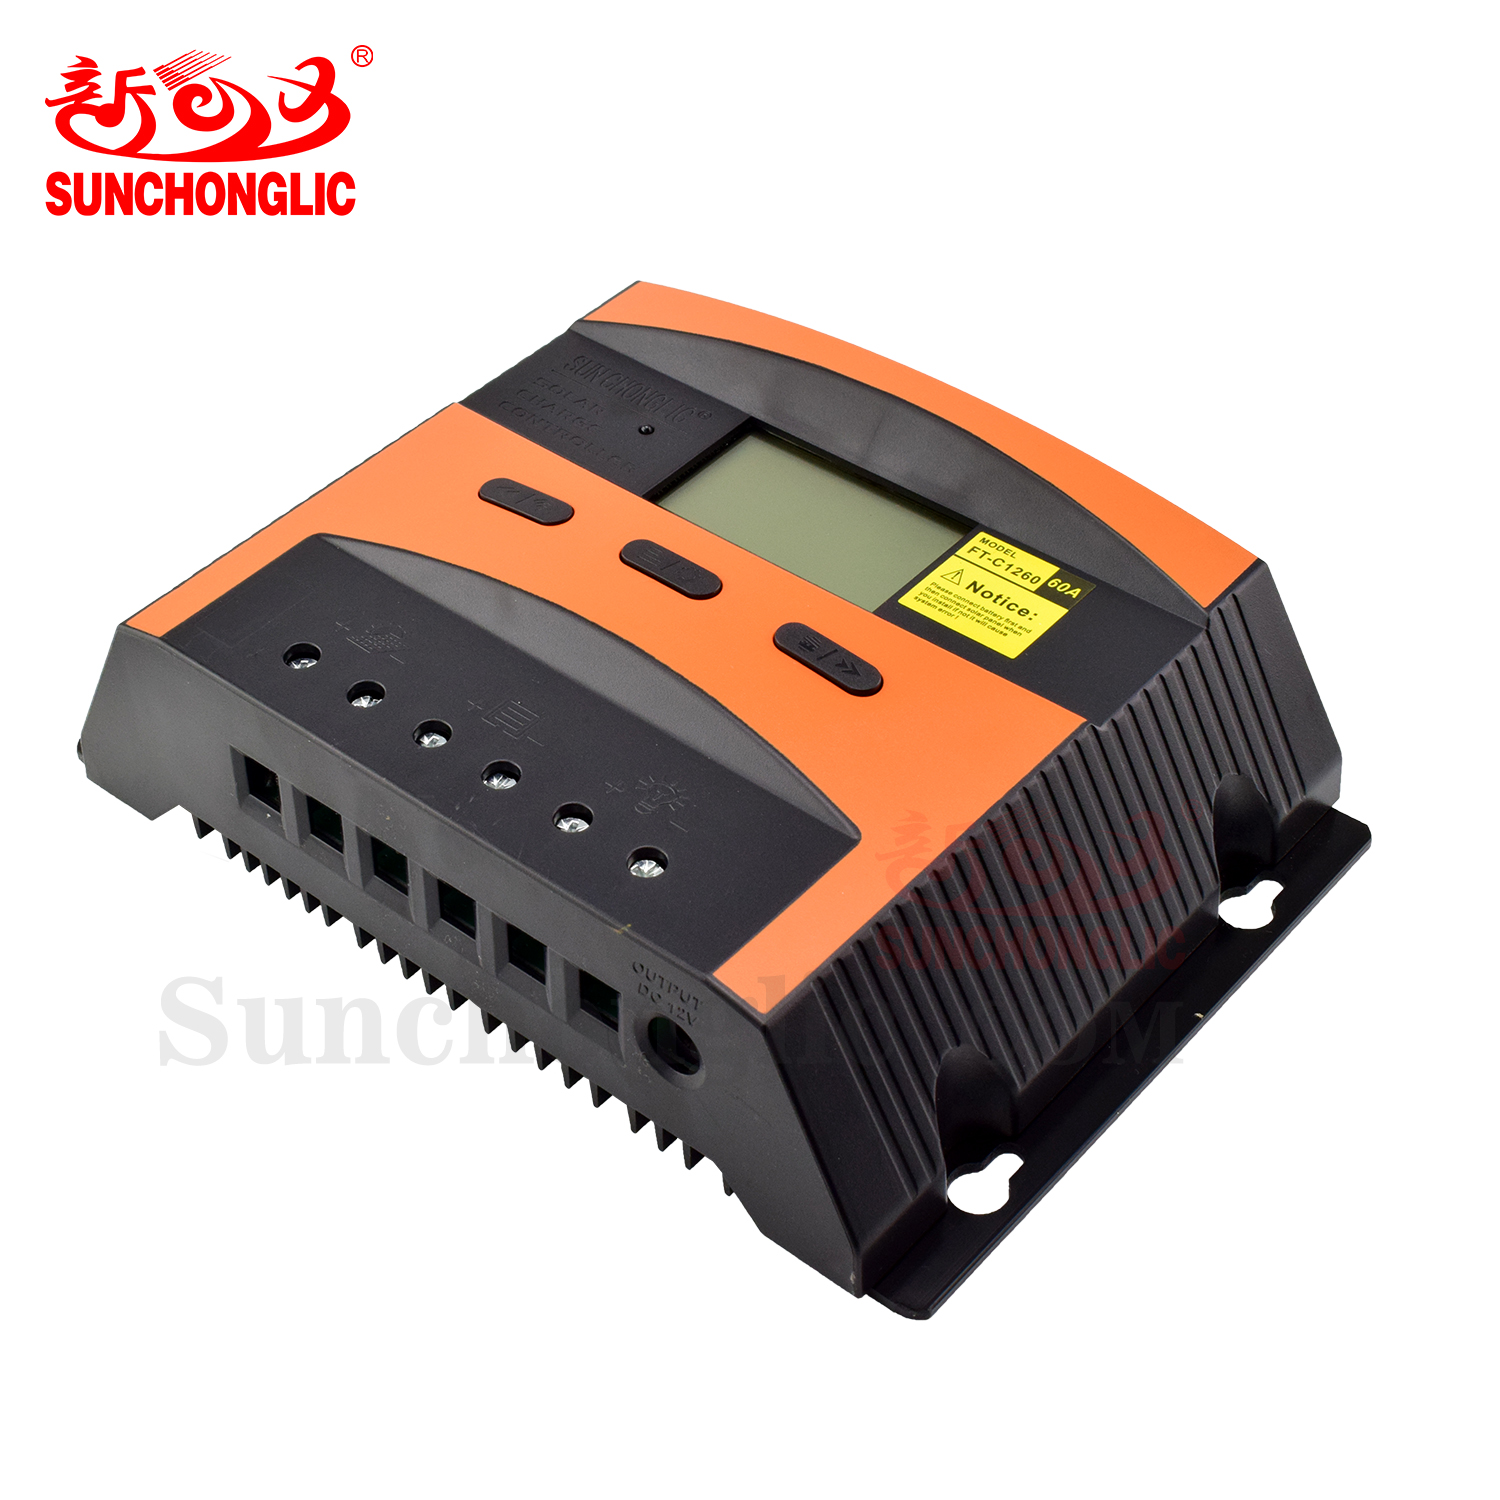 Solar Charge Controller - FT-C1260